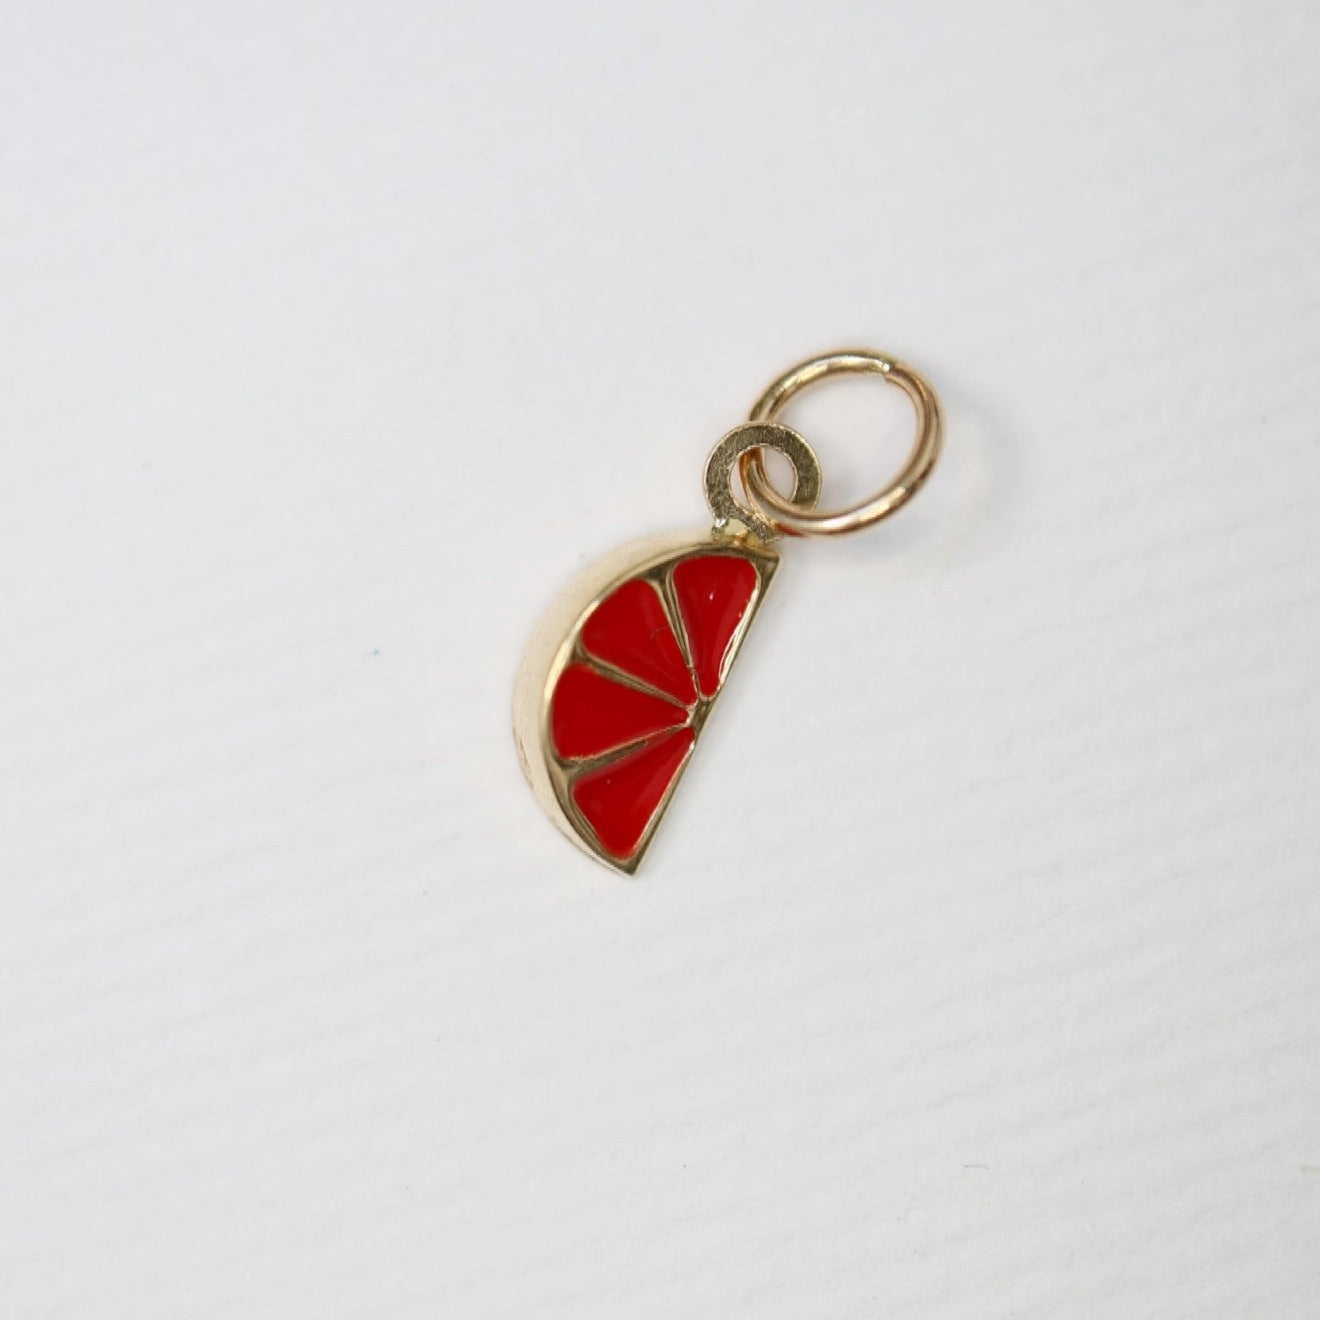 Gold charm with enamel